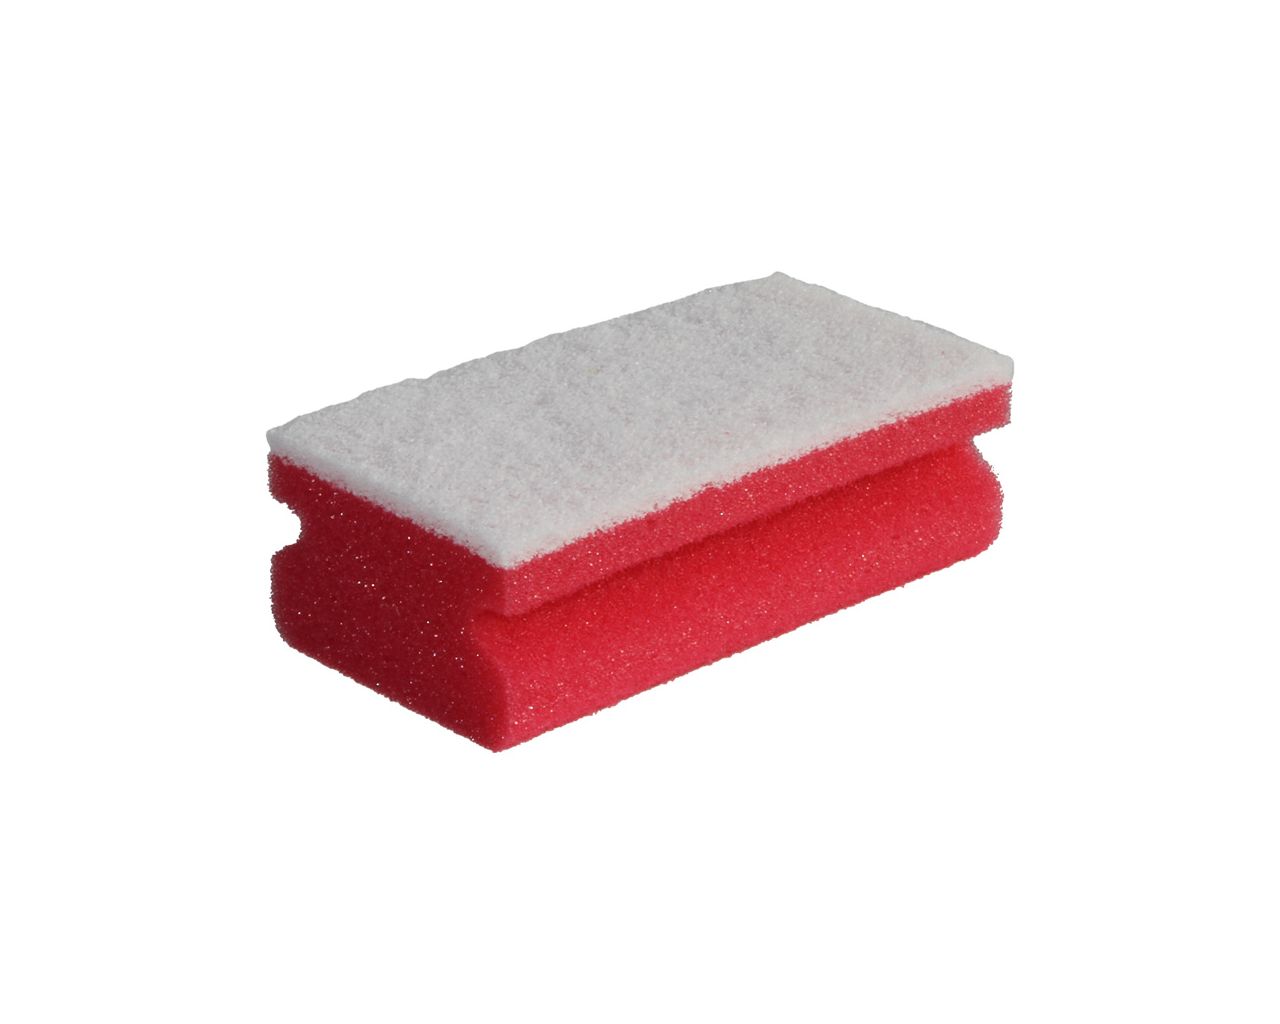 Easy grip foam backed scourer for non scratch cleaning of sensitive surfaces, 10 pcs. / package (red with white scouring surface)